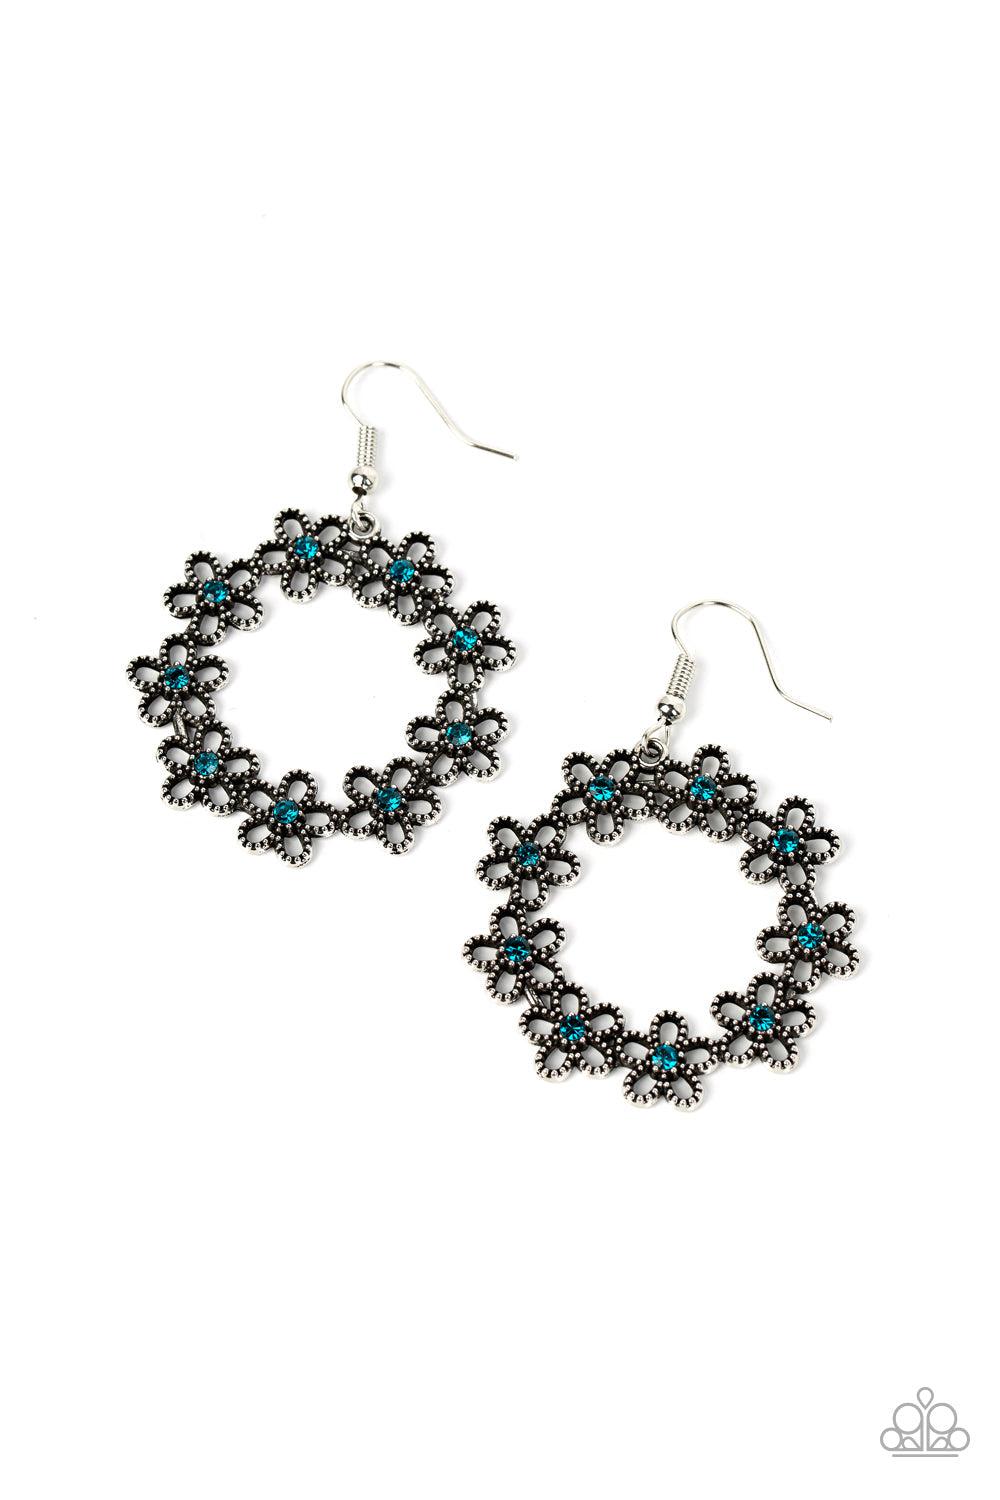 Floral Halos Blue Earrings - Paparazzi Accessories- lightbox - CarasShop.com - $5 Jewelry by Cara Jewels